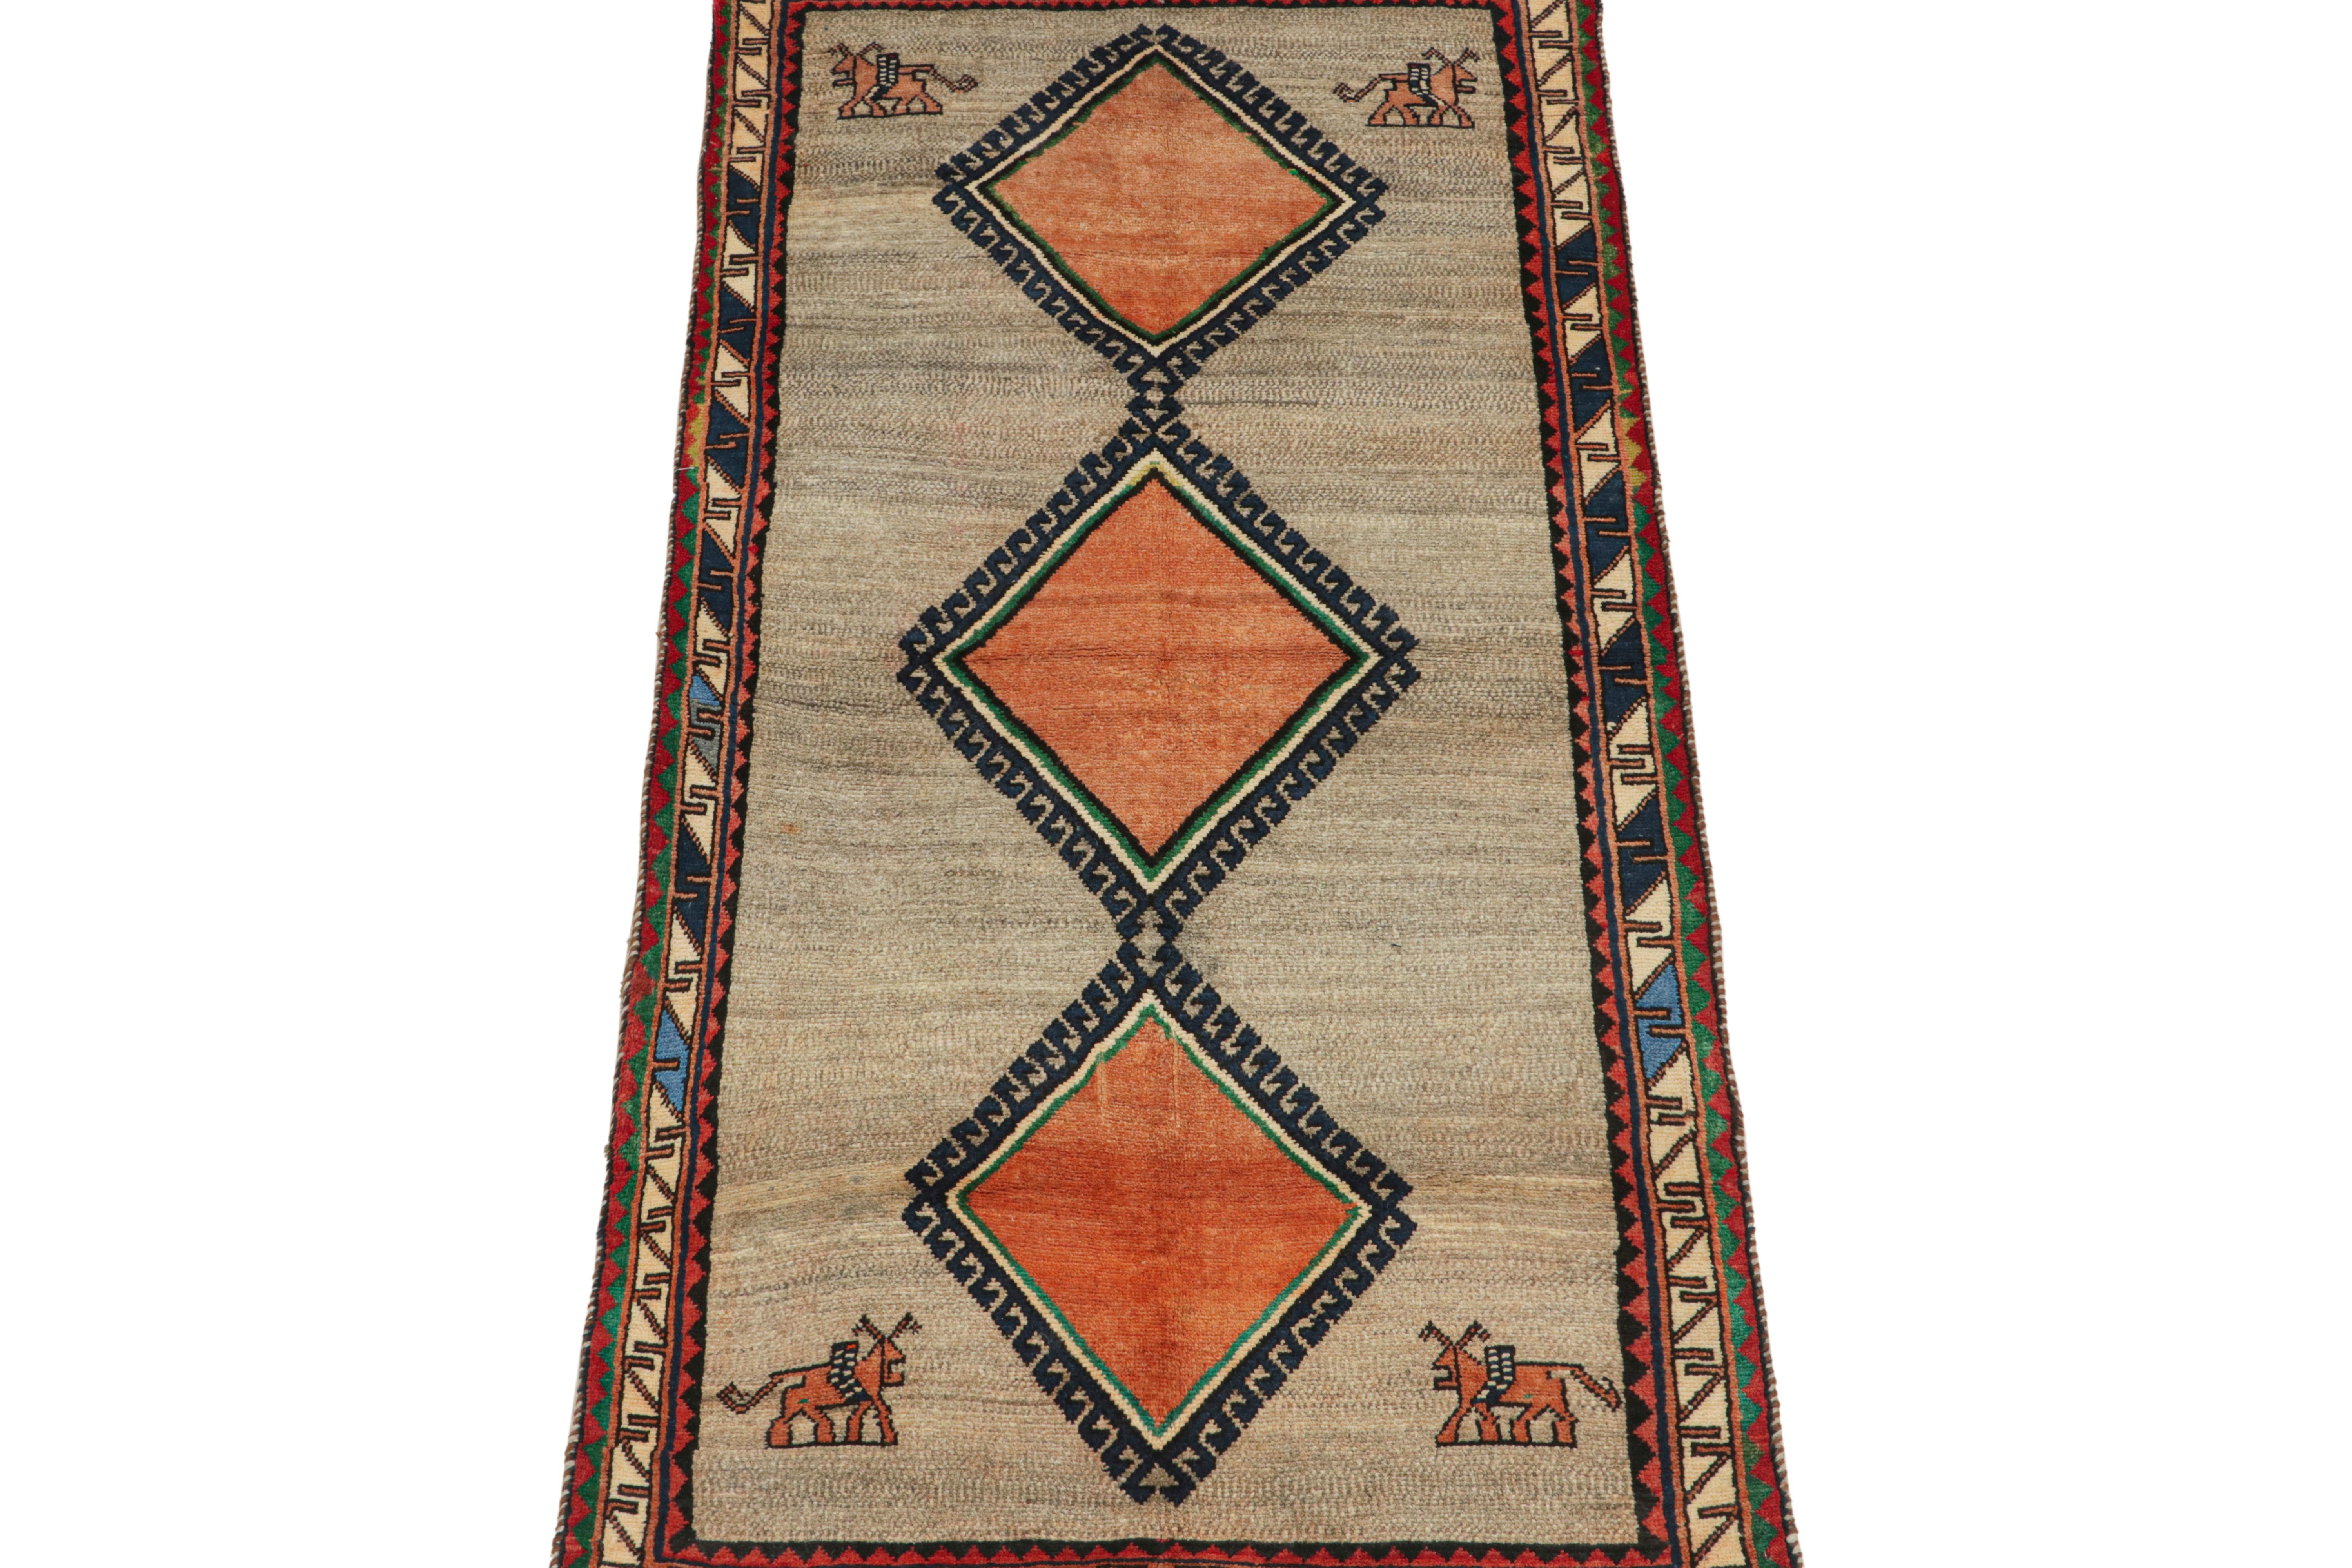 This vintage 3x7 Persian runner is a rare mid-century tribal piece, hand-knotted in wool circa 1950-1960.

Its design plays orange medallions on a beige and gray field within brightly colored borders with geometric patterns. Keen eyes will further